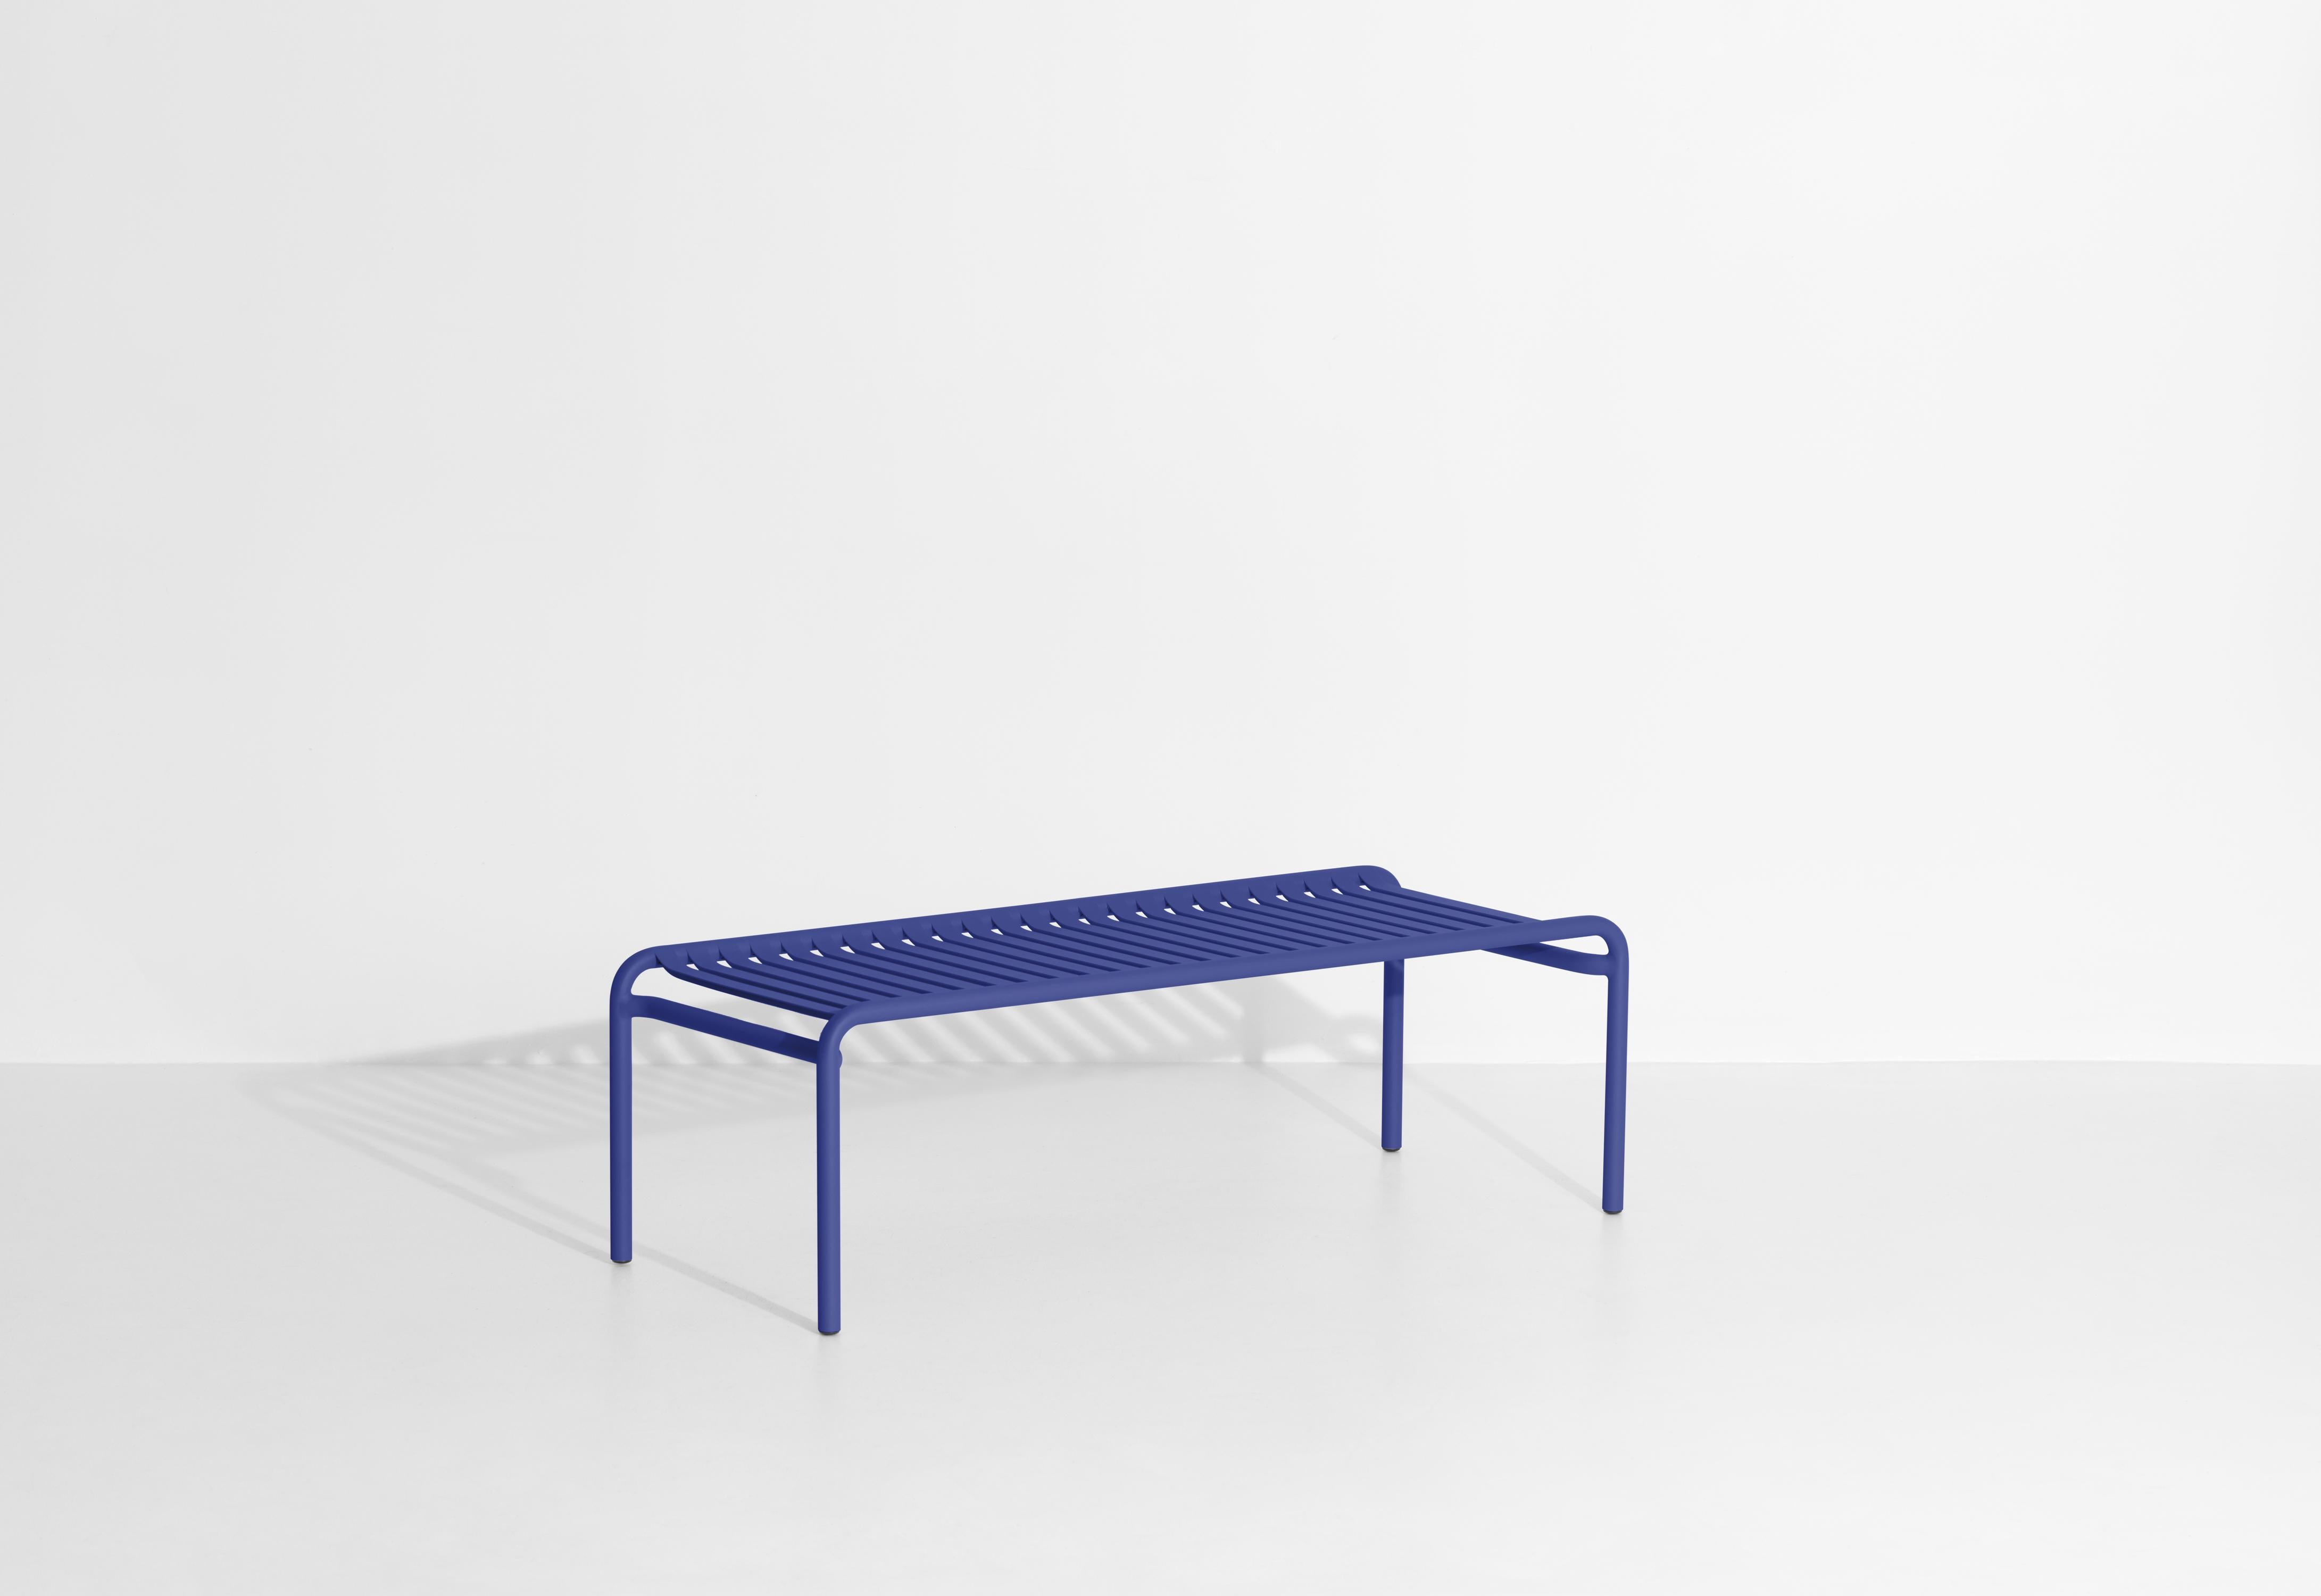 Chinese Petite Friture Week-End Long Coffee Table in Blue Aluminium, 2017 For Sale